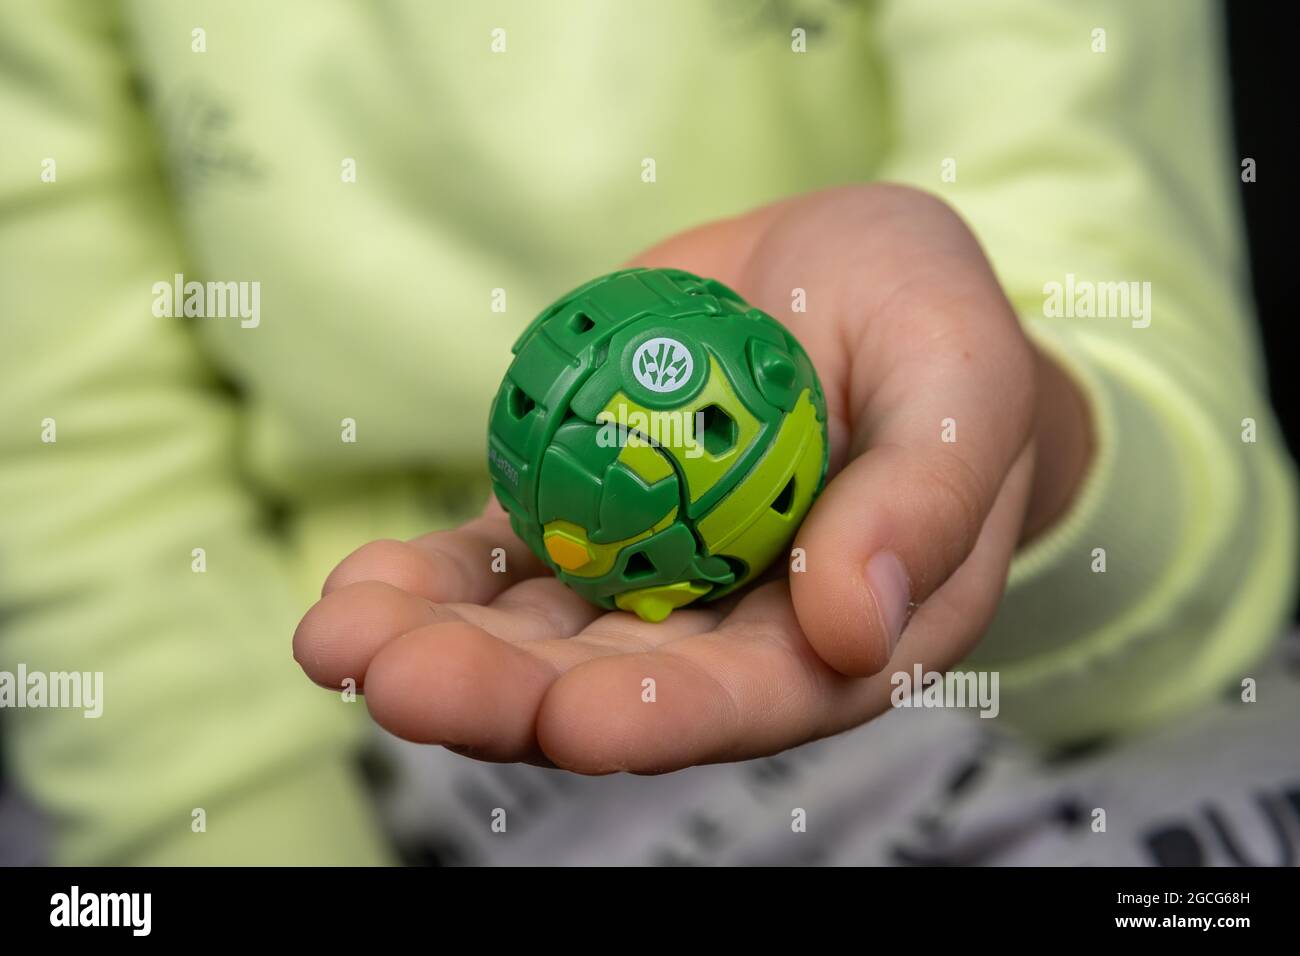 Bakugan Ball toy. New popular transformer toy assembled in ball shape, hold in child's hand. Stafford, United Kingdom, August 8, 2021 Stock Photo